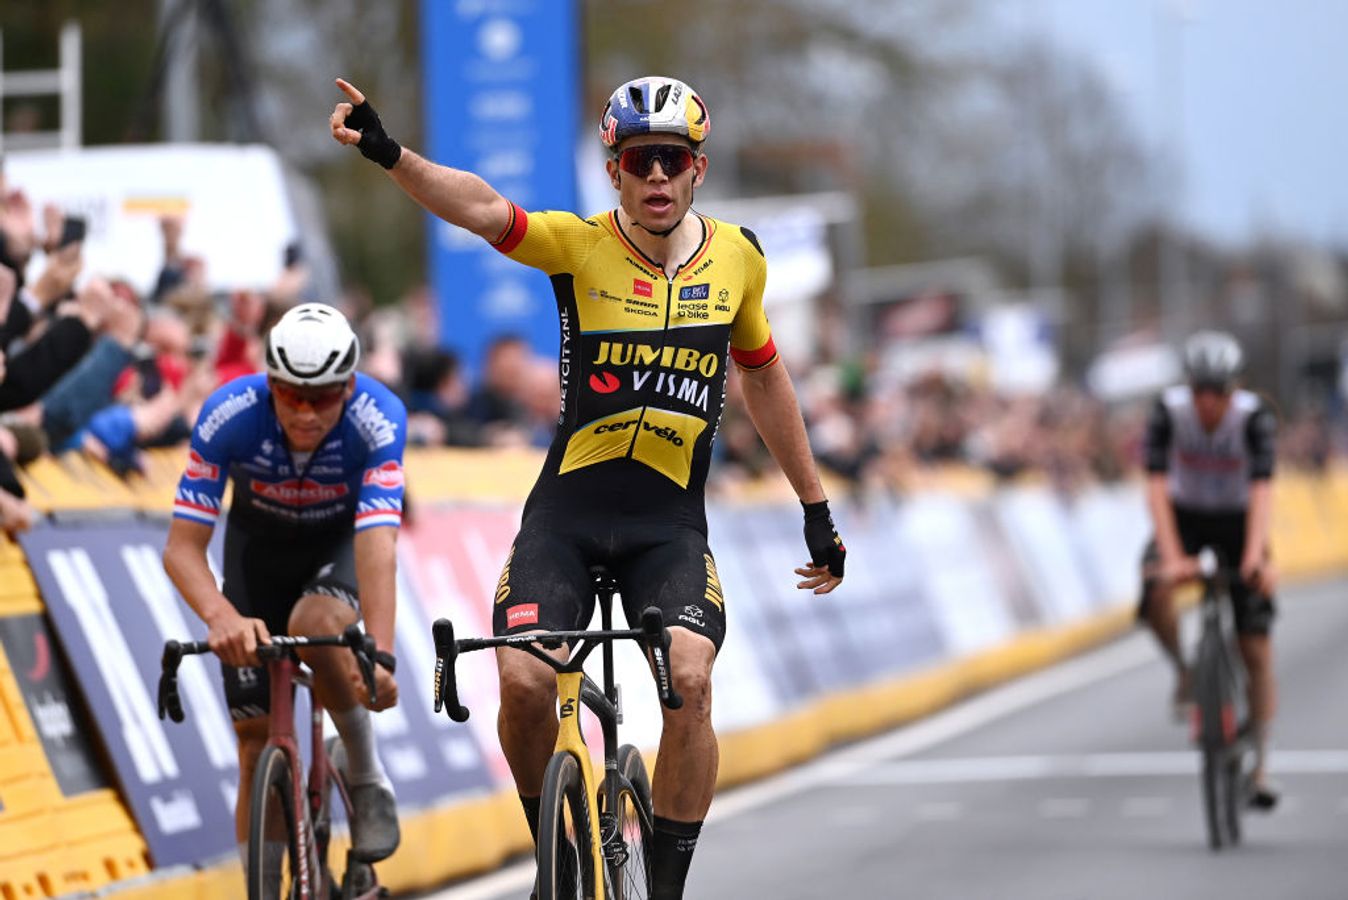 Van der Poel was beaten in a three-man sprint by rival Wout van Aert at the E3 Saxo Classic in 2023